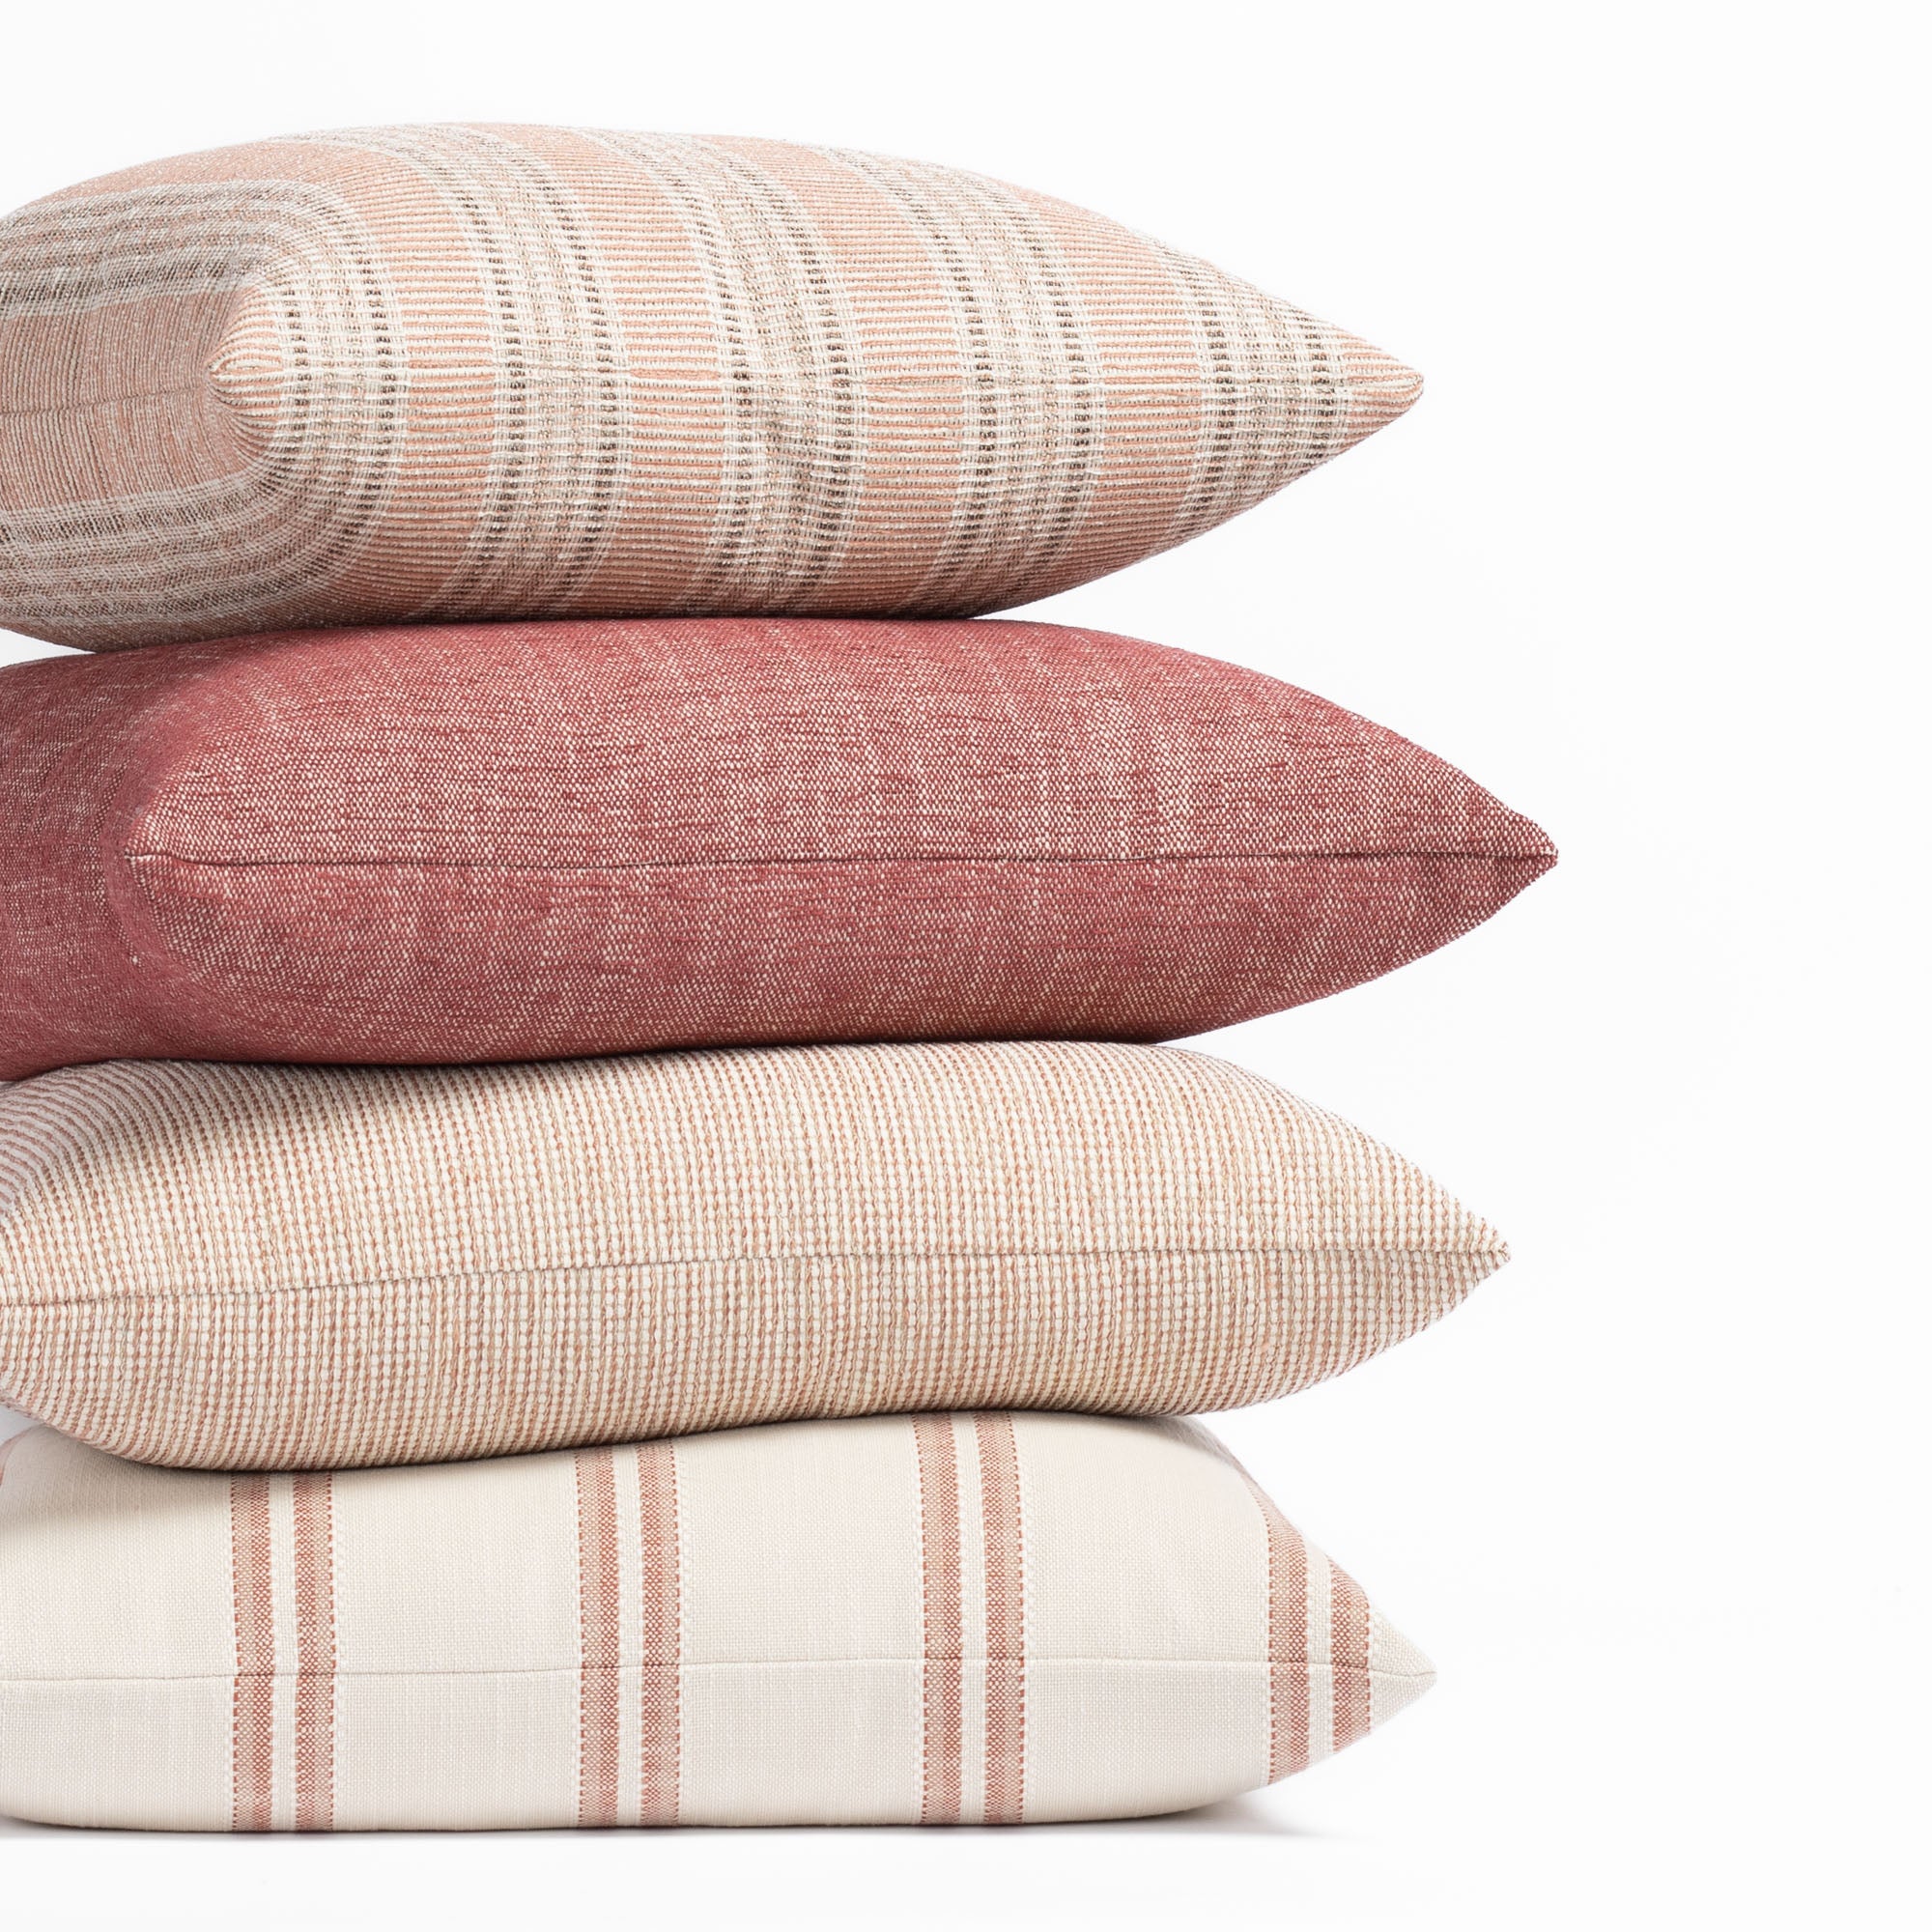 Earthy red, terracotta clay and sandy taupe outdoor pillow collection from Tonic Living